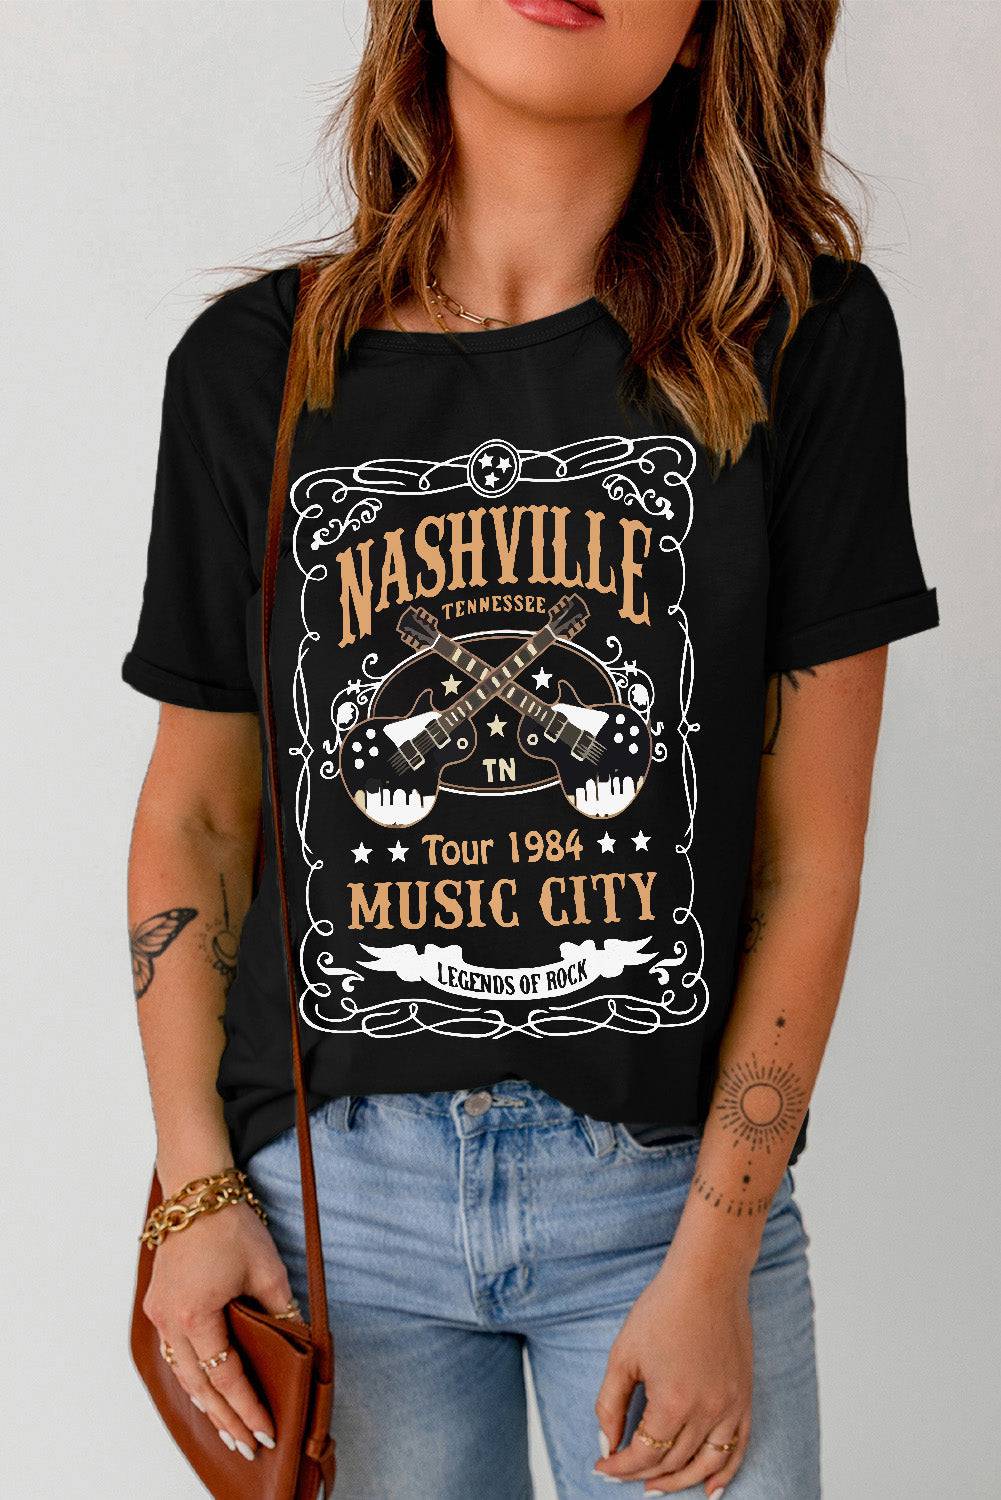 Nashville Music City Graphic Tee Shirt - Indulge in the Melodic Enchantment of Nashville - Feel the Rhapsody of Music with Every Wear - Guy Christopher